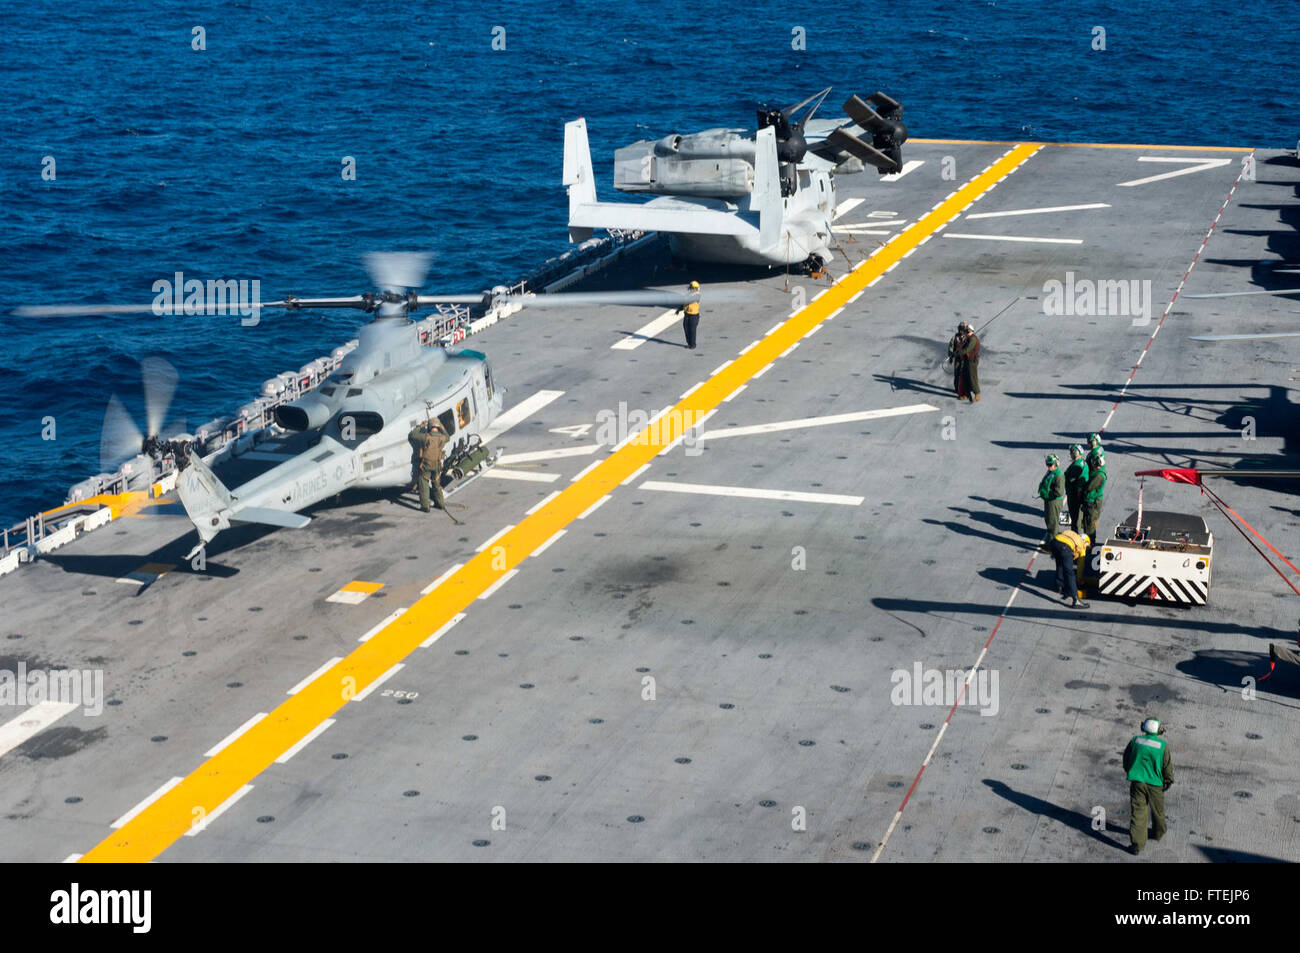 ATLANTIC OCEAN (Dec. 23, 2014) A UH-1N Huey from Marine Medium Tiltrotor Squadron 365 (Reinforced) prepares for flight operations on the flight deck of USS Iwo Jima (LHD 7) Dec. 23, 2014. The Iwo Jima Amphibious Ready Group/24th Marine Expeditionary Unit is conducting naval operations in the U.S. 6th Fleet area of operations in support of U.S. national security interests in Europe. Stock Photo